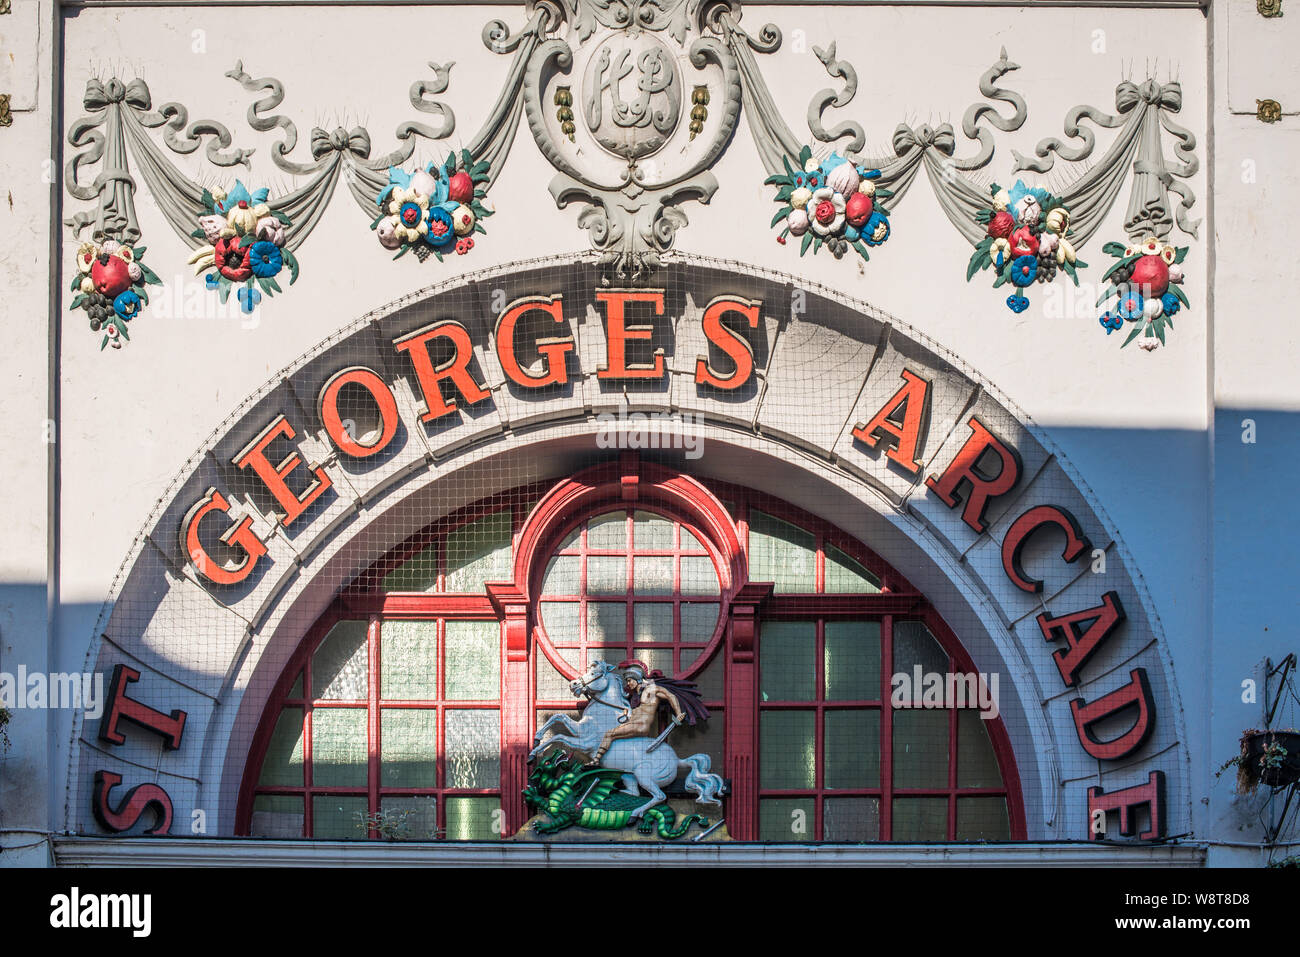 Entrance to St George's Arcade, built in 1912 as a cinema (second largest in the UK) and now used as a shopping arcade, Famouth, Cornwall, England, UK. Stock Photo